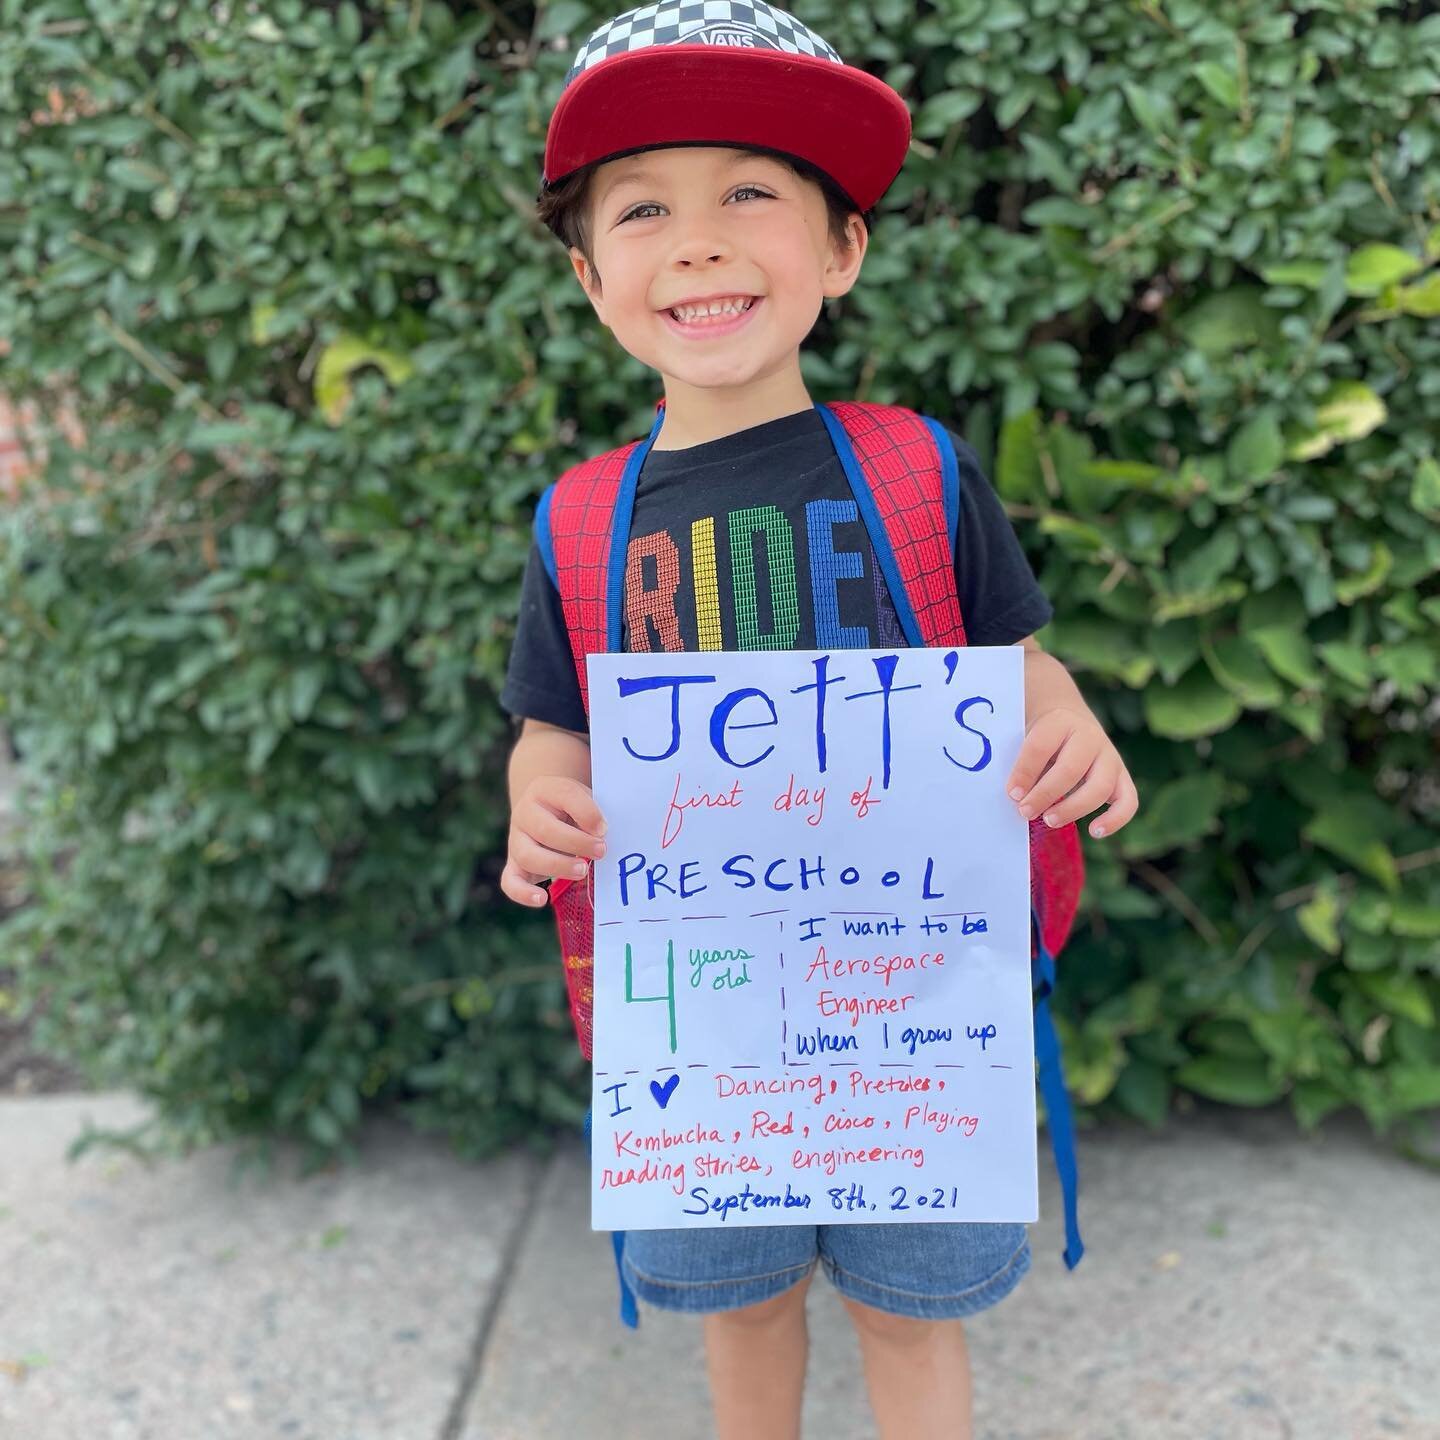 I was too emotional to post this yesterday, but Jett had his first day of preschool!!! So proud of this little man. He was so excited and loved it! I&rsquo;m not crying, you are!!